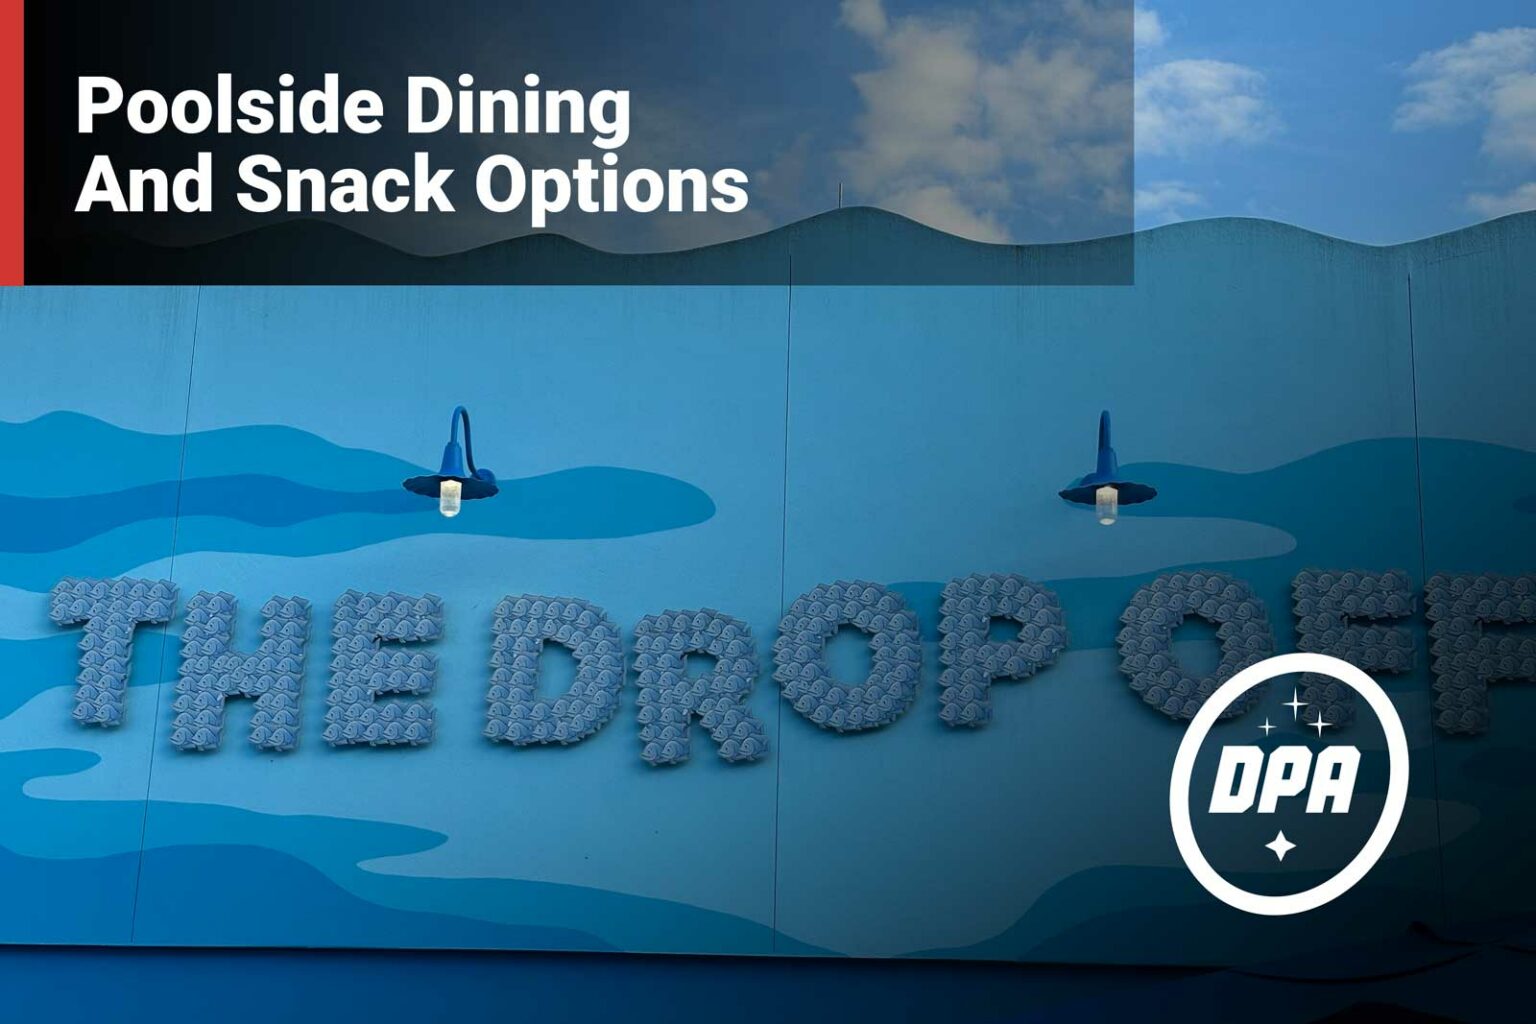 Poolside Dining And Snack Options